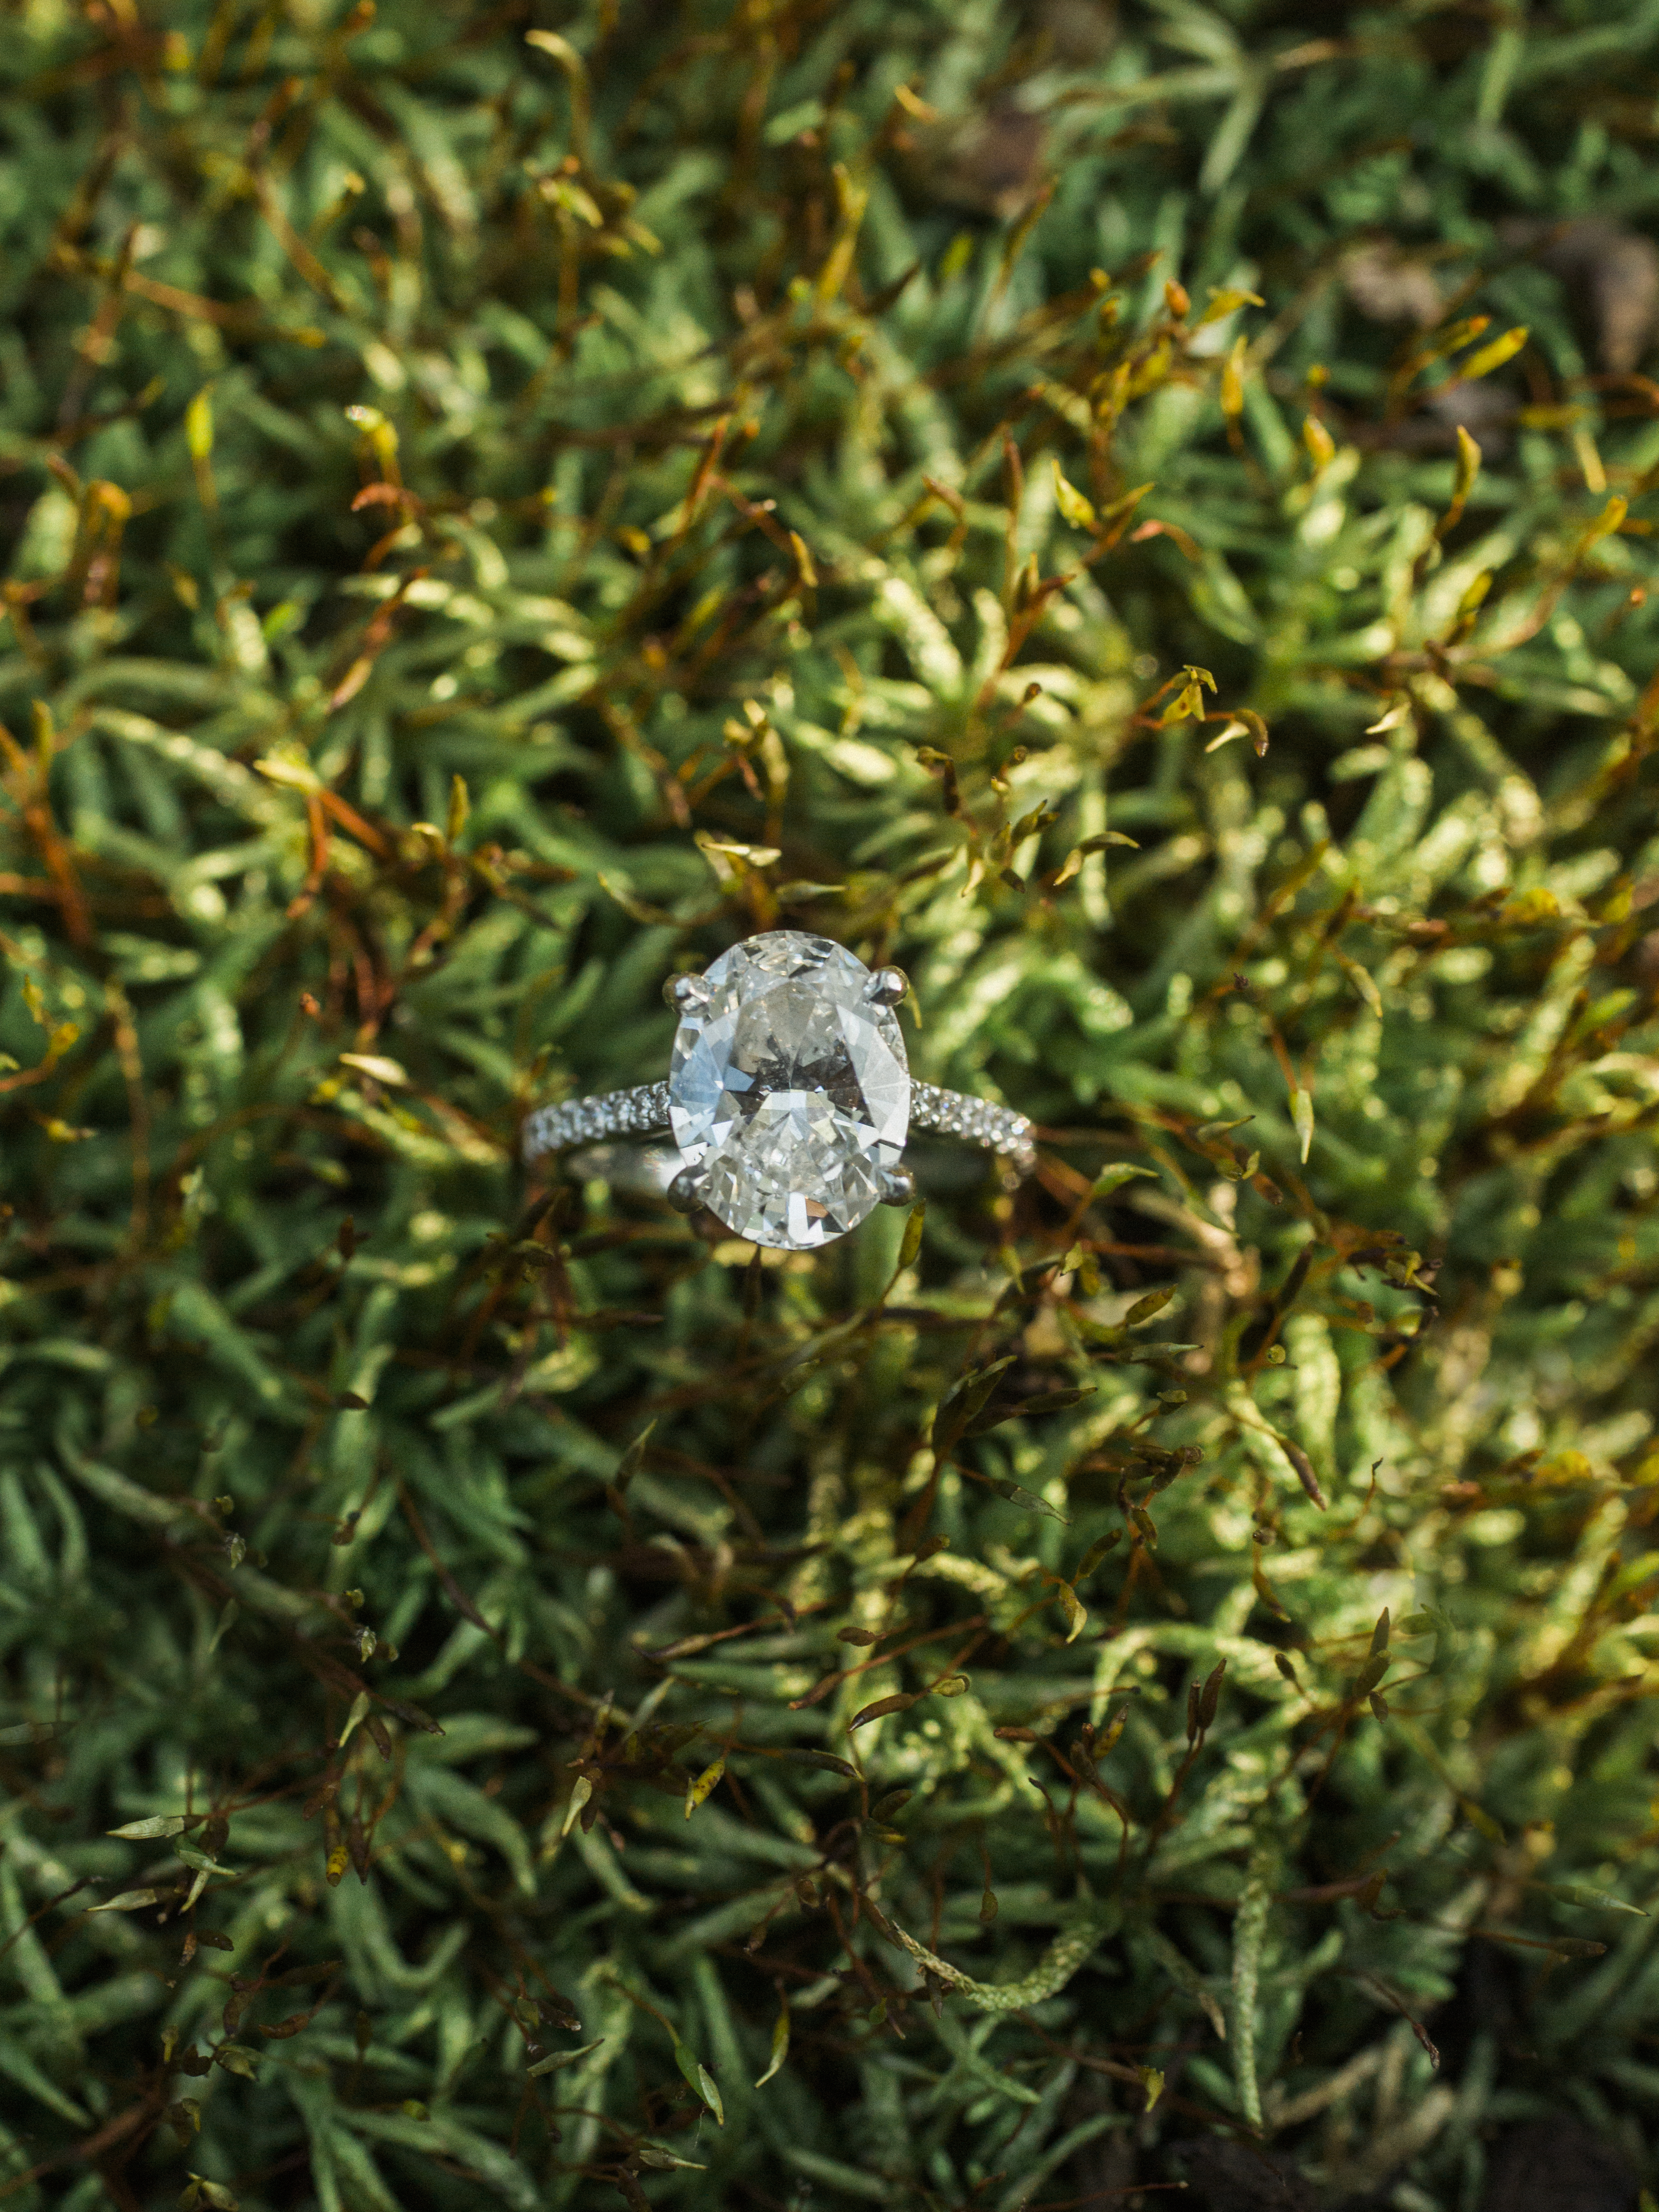 Engagement ring details amongst moss by Love Tree Studios.